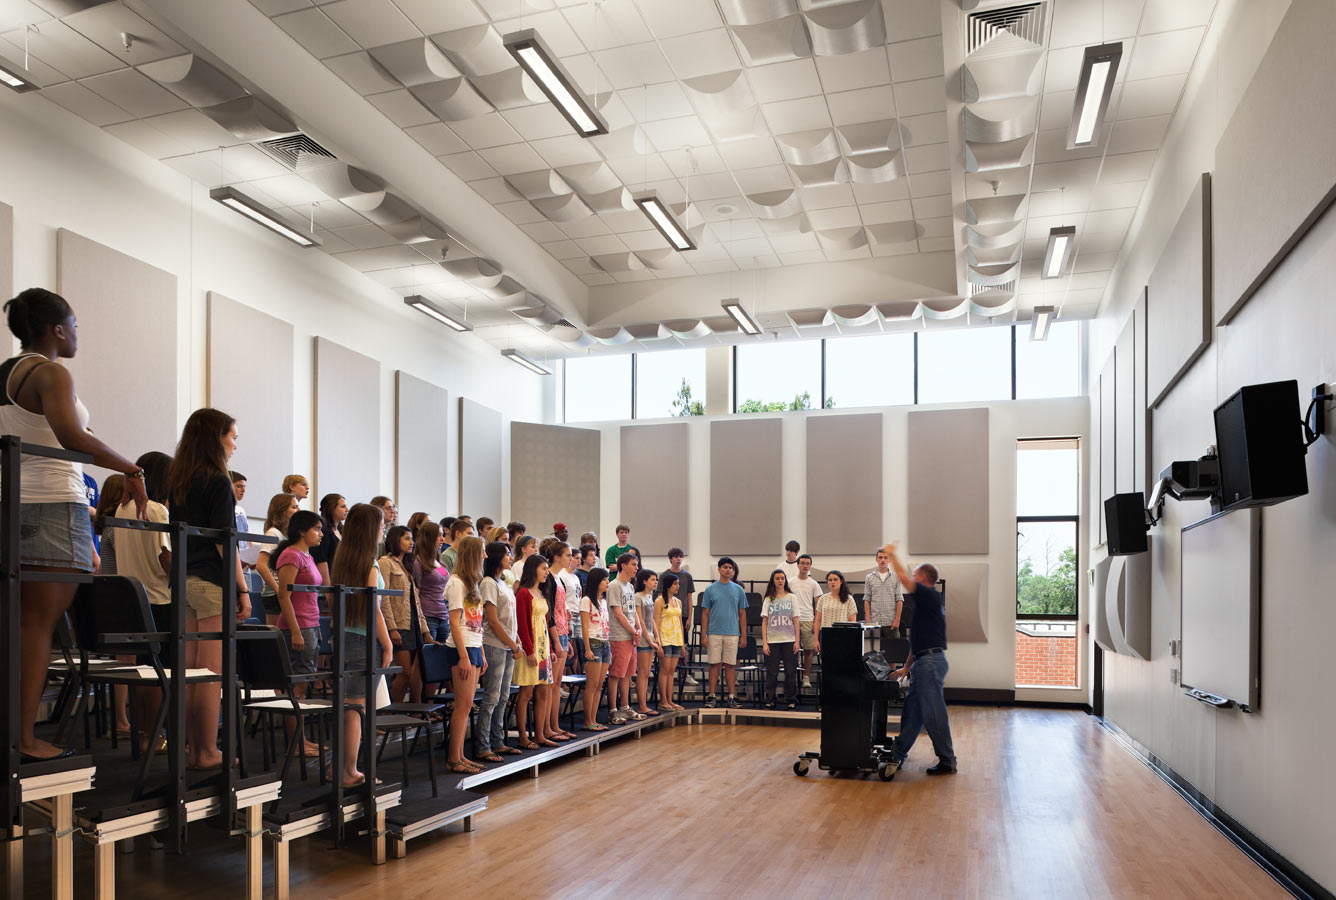 <p>On the same level as the Meeting Room, the choral practice room makes use of carefully specified acoustic features and sound-proofing. <br><small>&copy; Michael Moran/OTTO</small> </p>